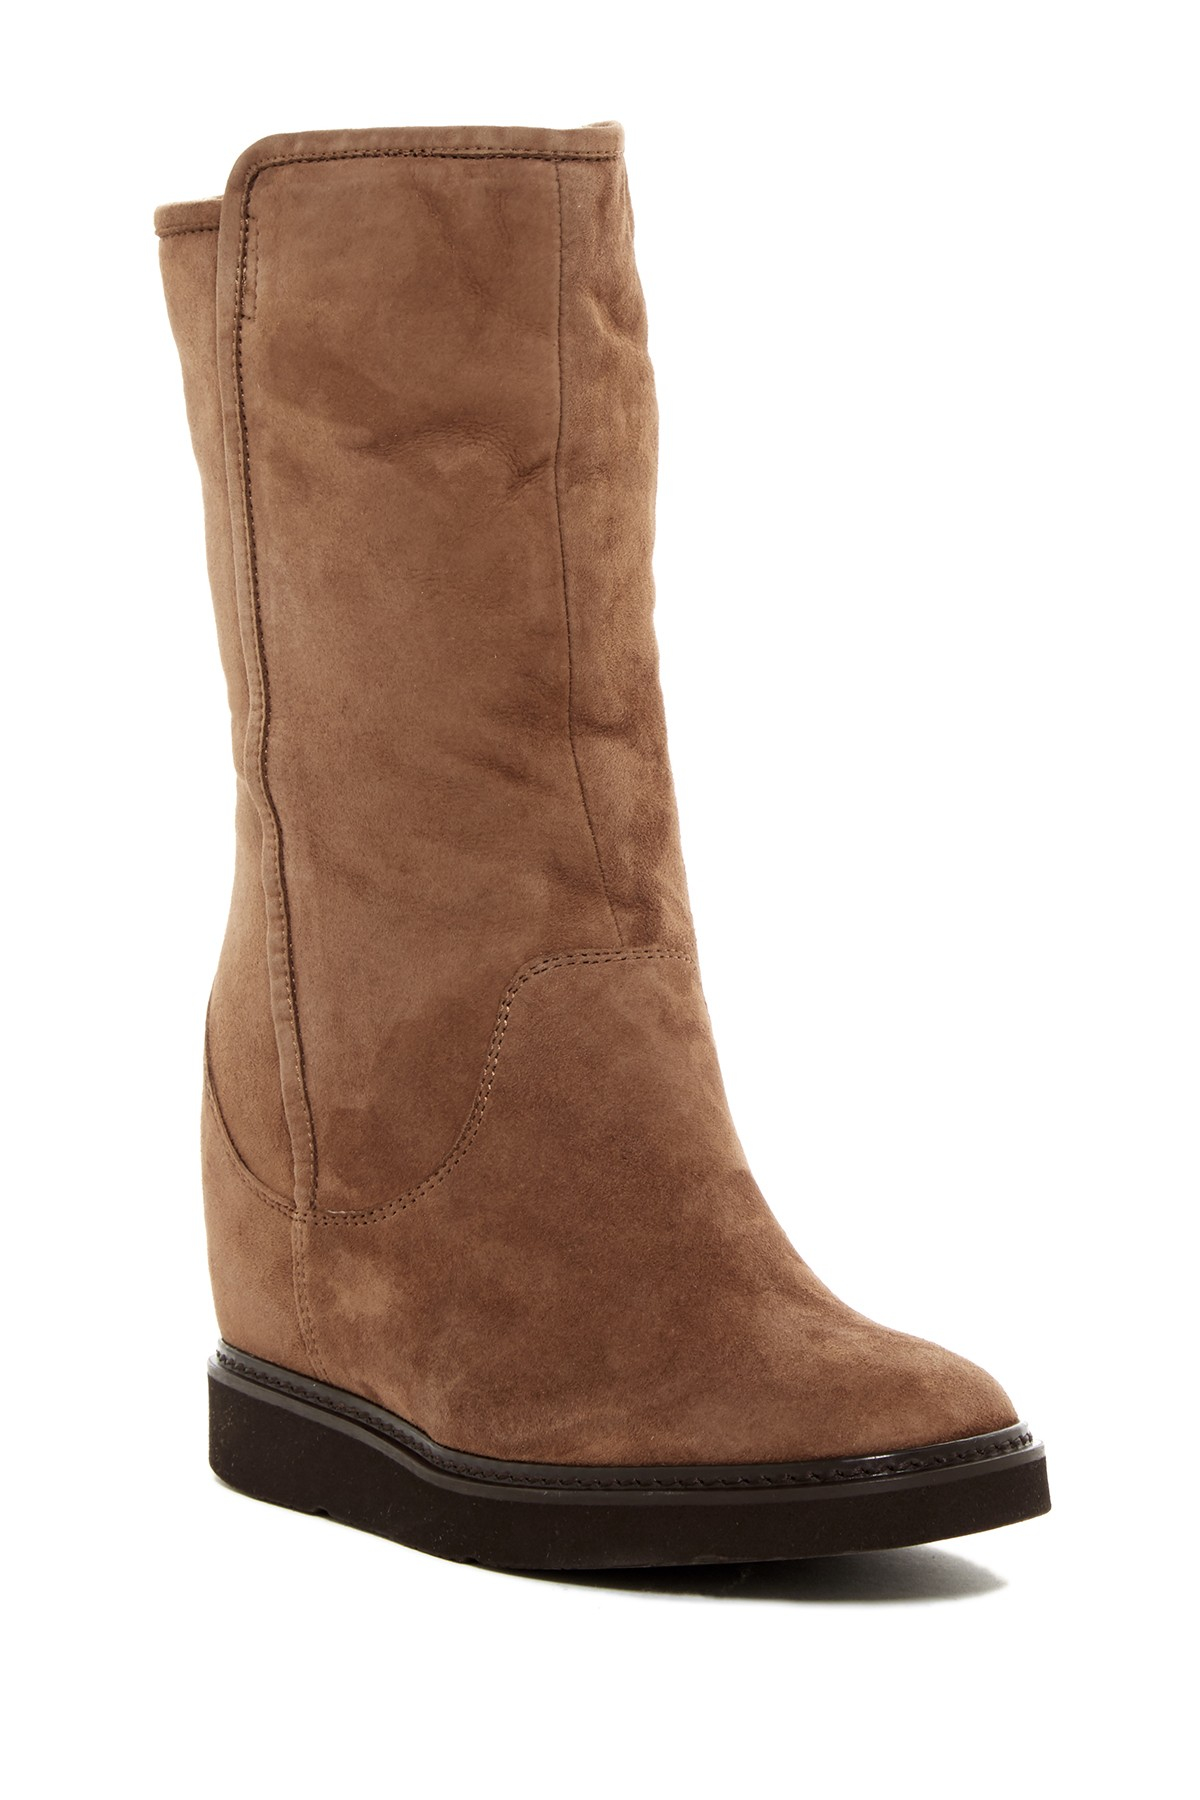 UGG Gisella Hidden Wedge Boot in Brown | Lyst